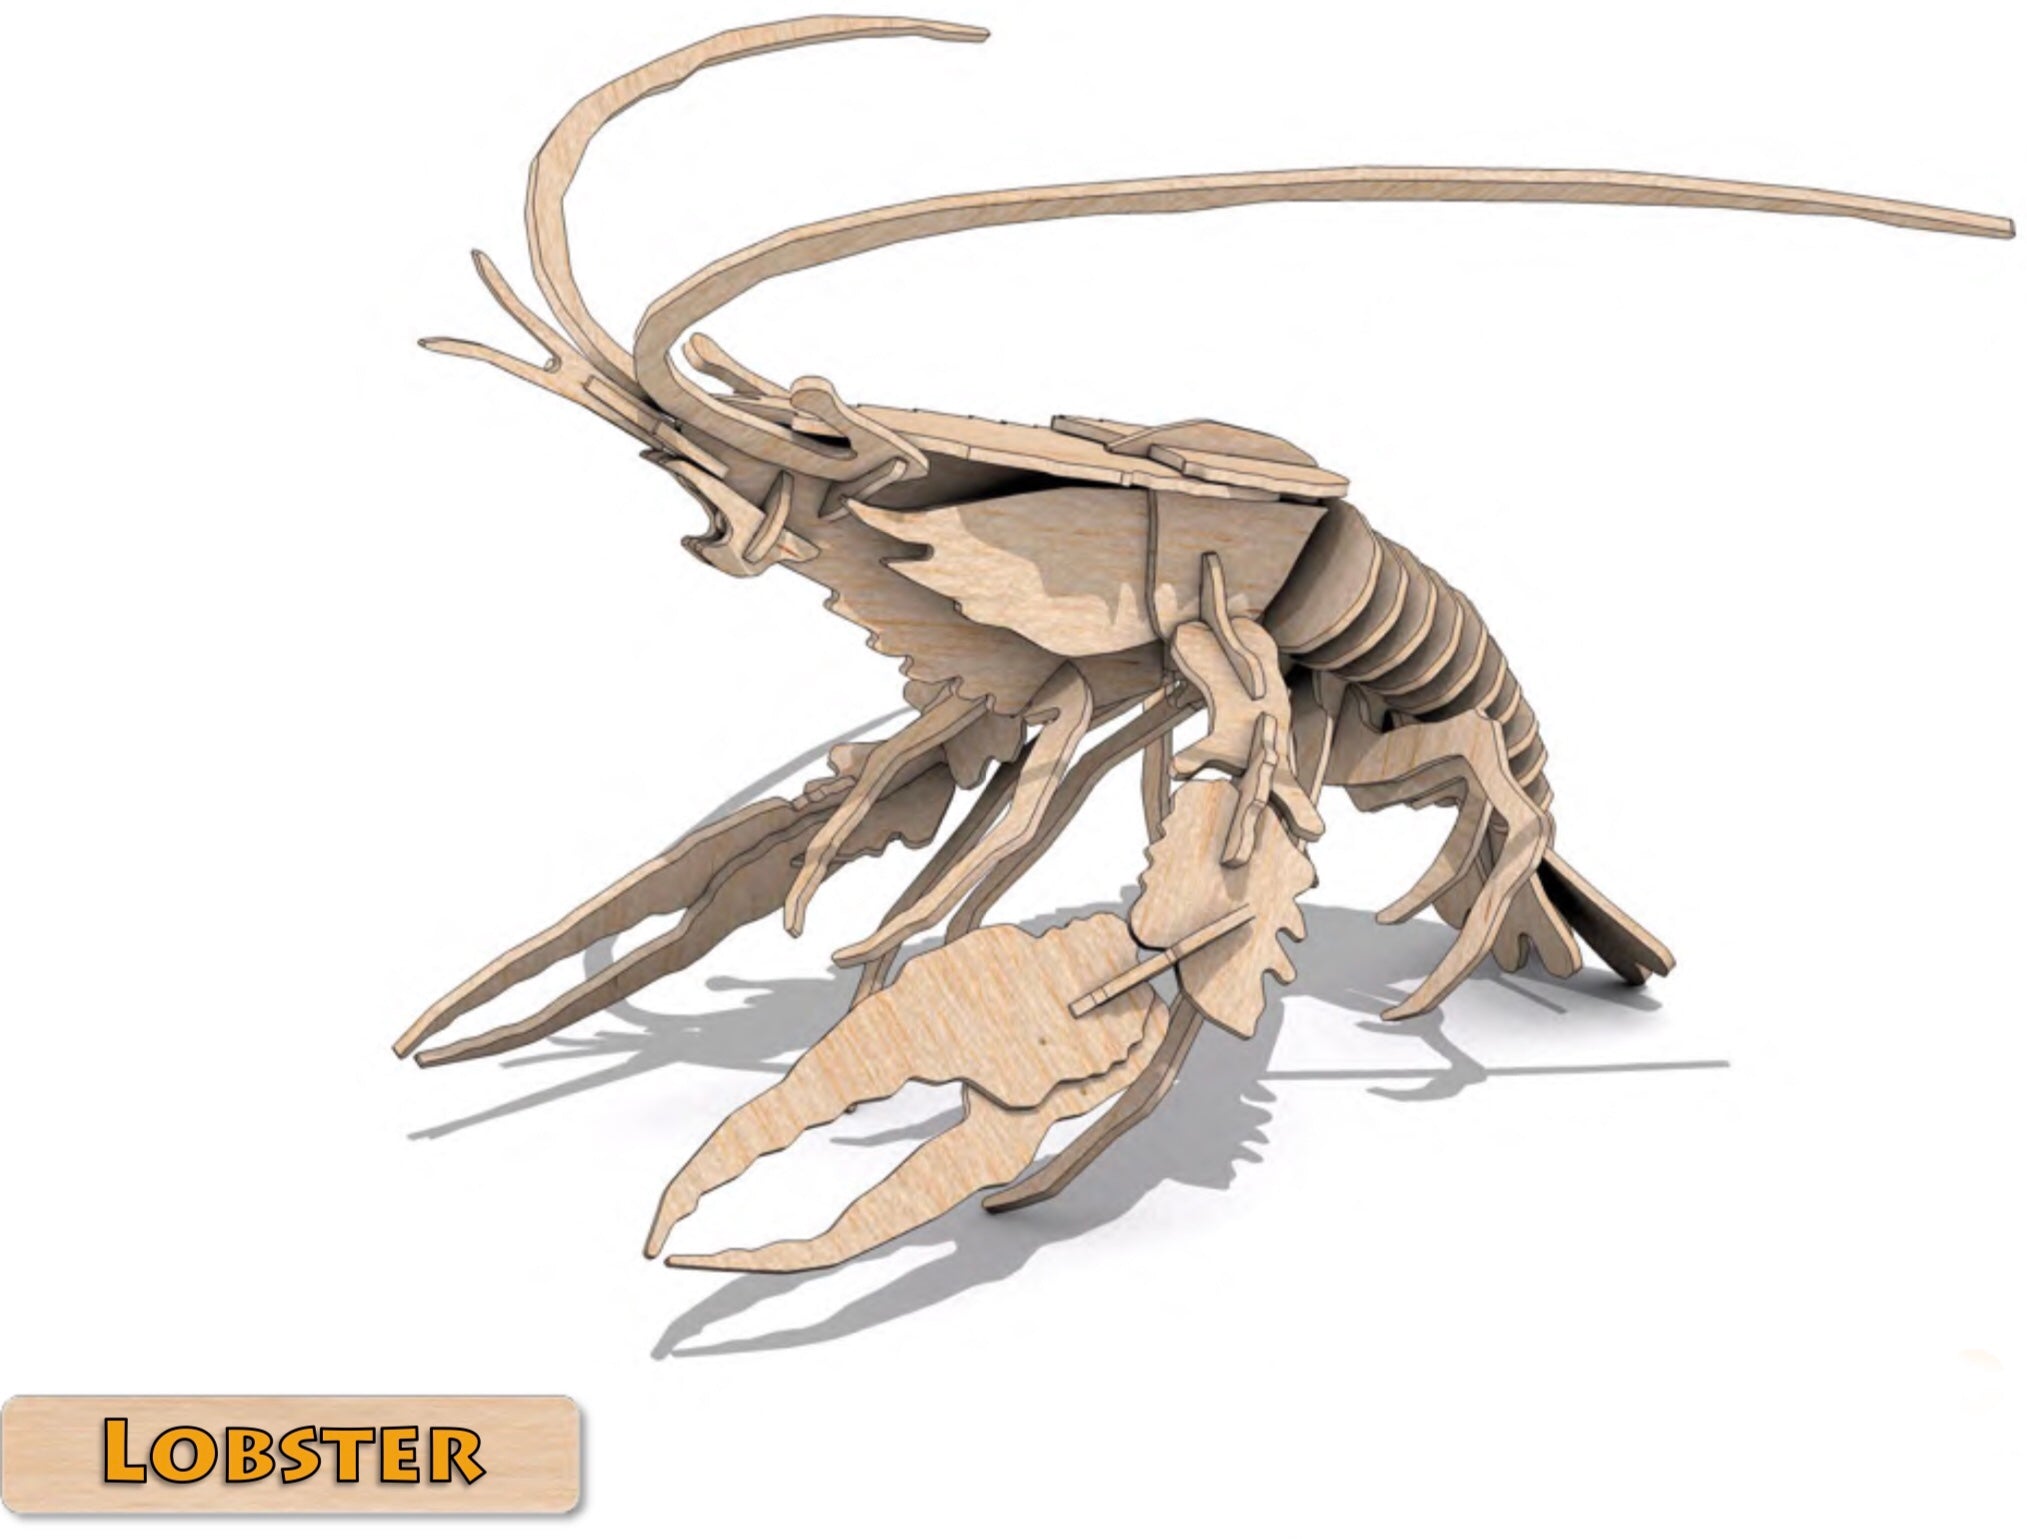 3D Puzzle- Lobster